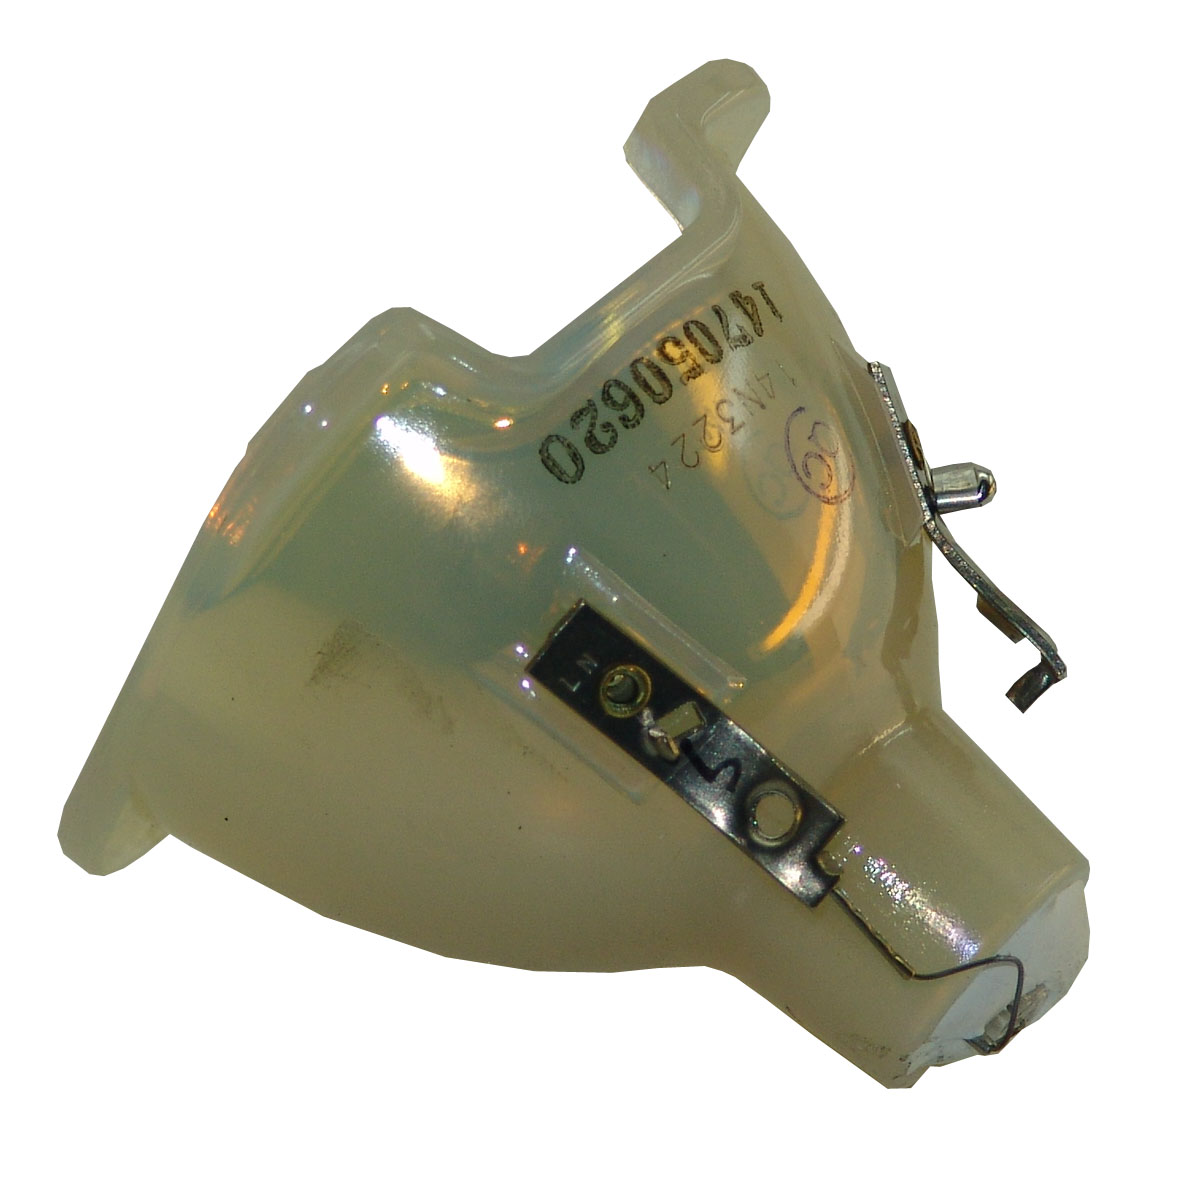 Original Philips Projector Lamp Replacement for BenQ 59.J9401.CG1 (Bulb Only) - image 5 of 6